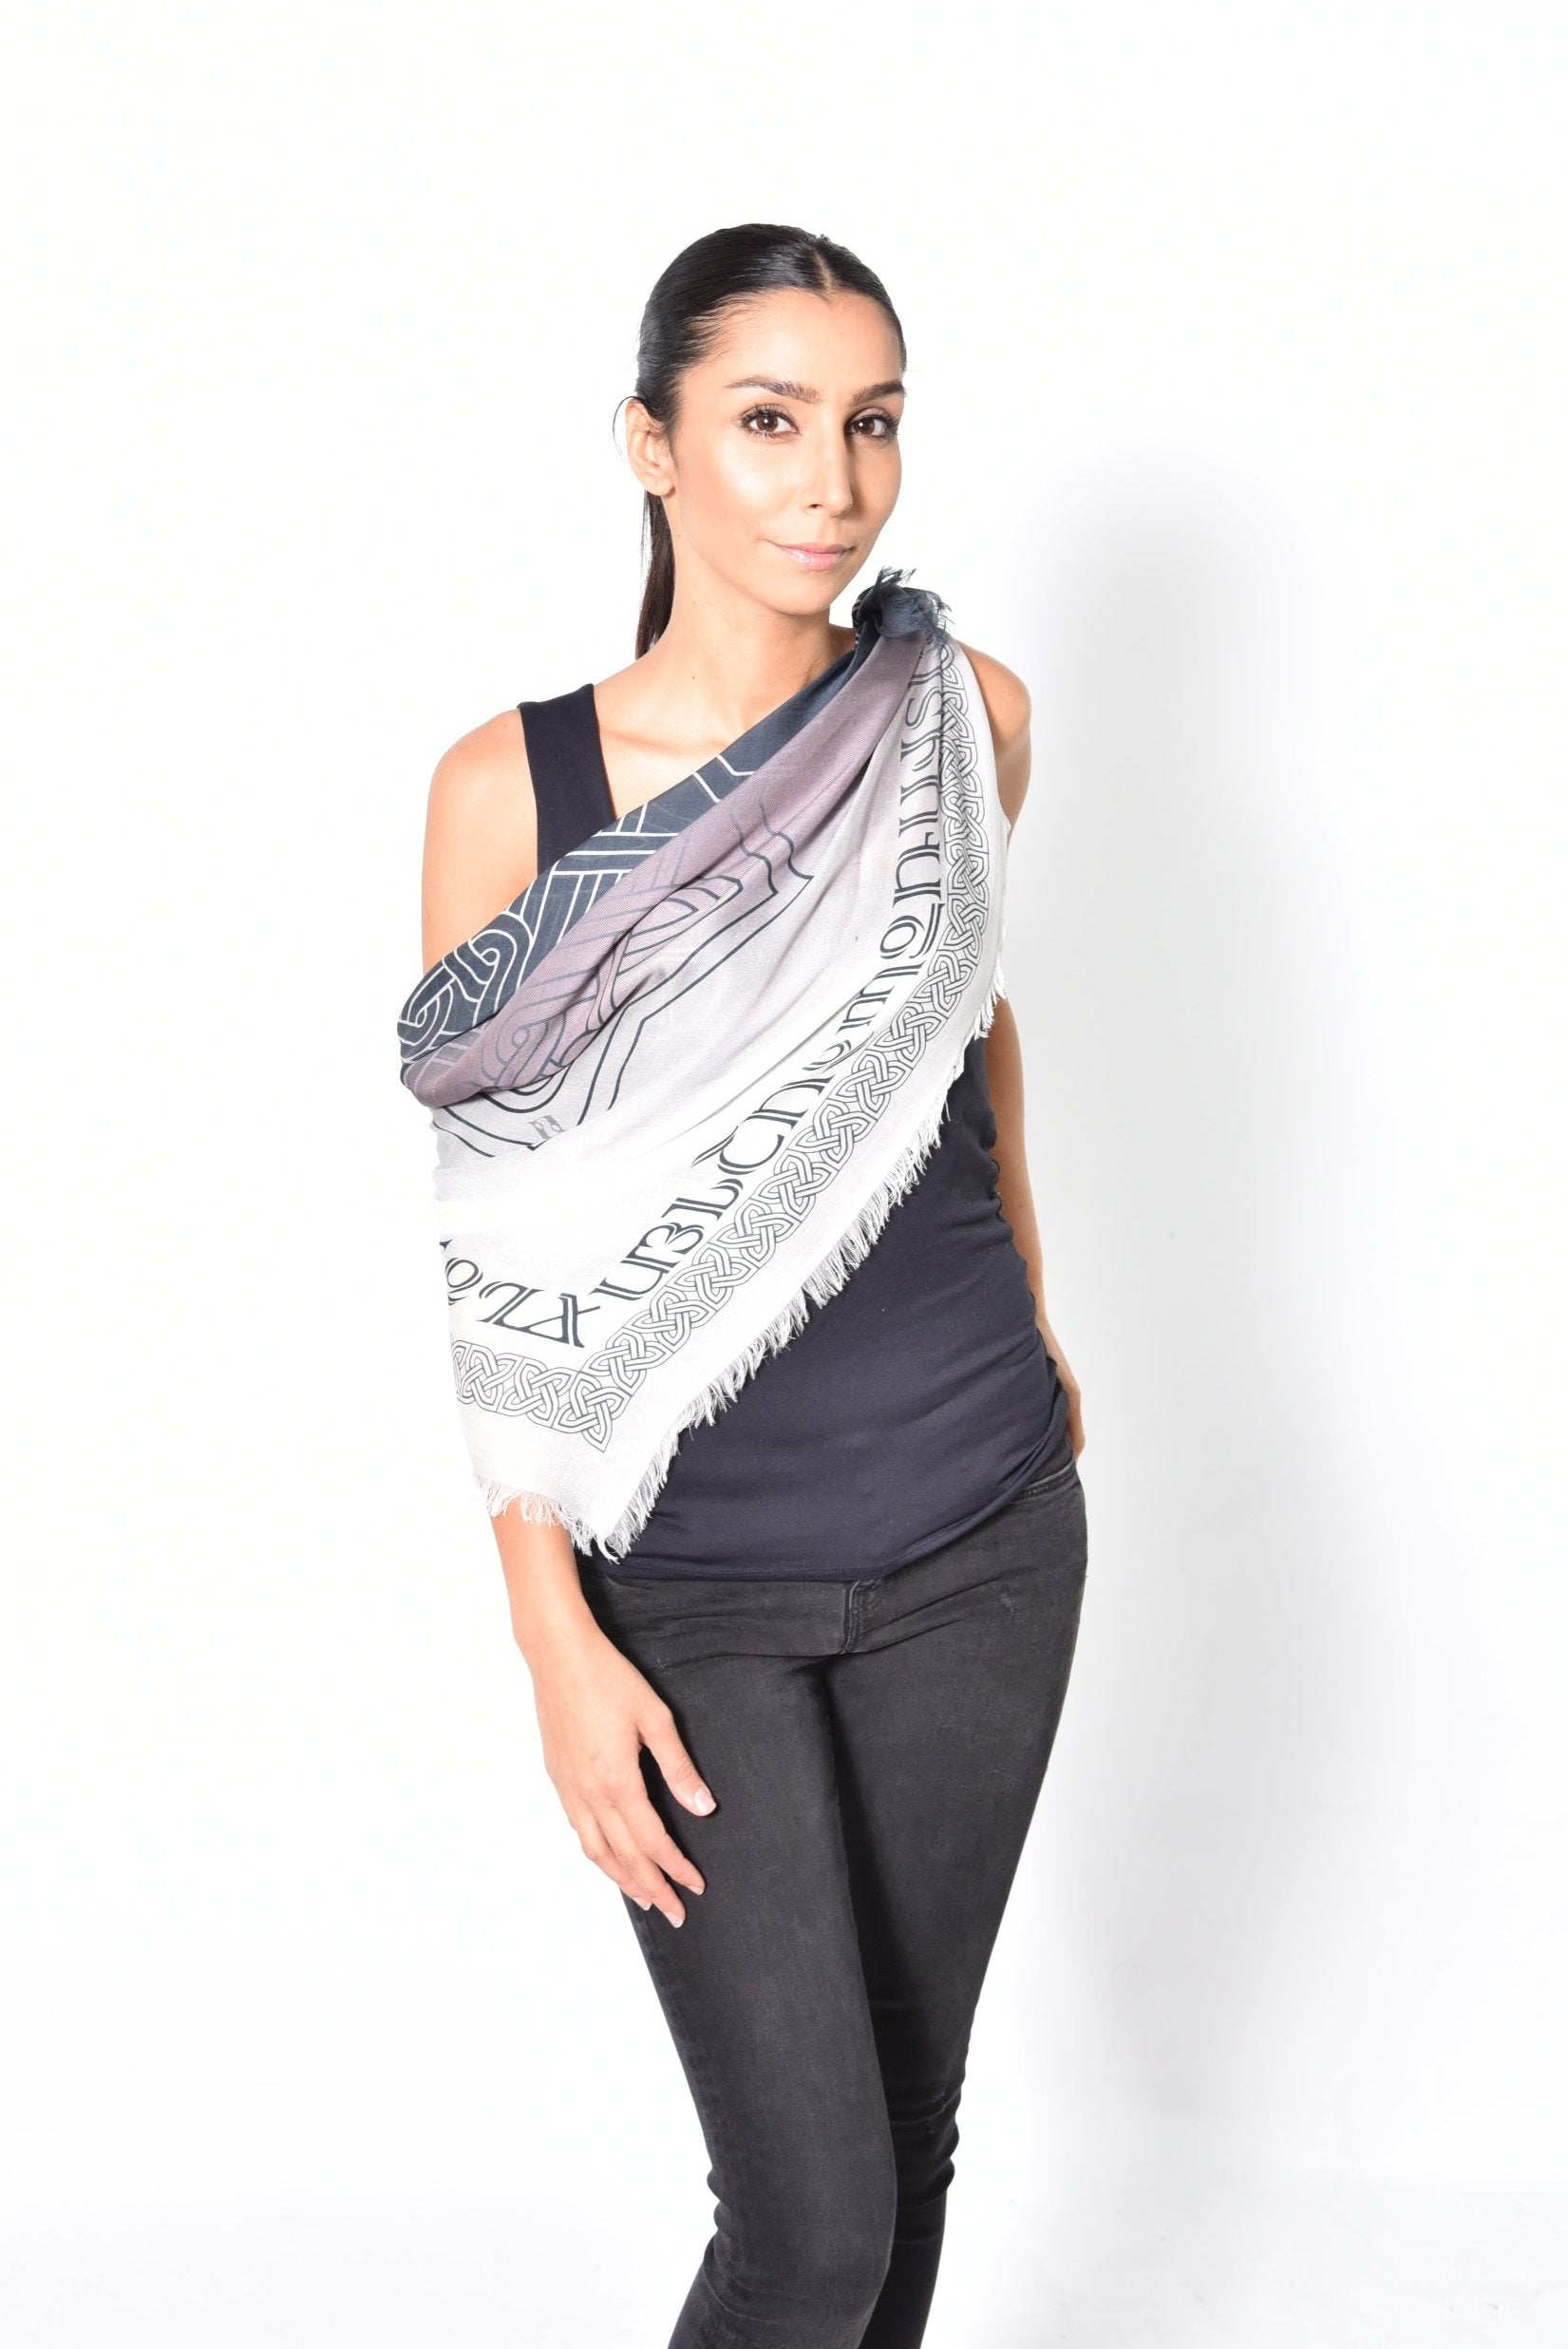 Armenian Alphabet and Eternity Scarf - Lusanet Collective